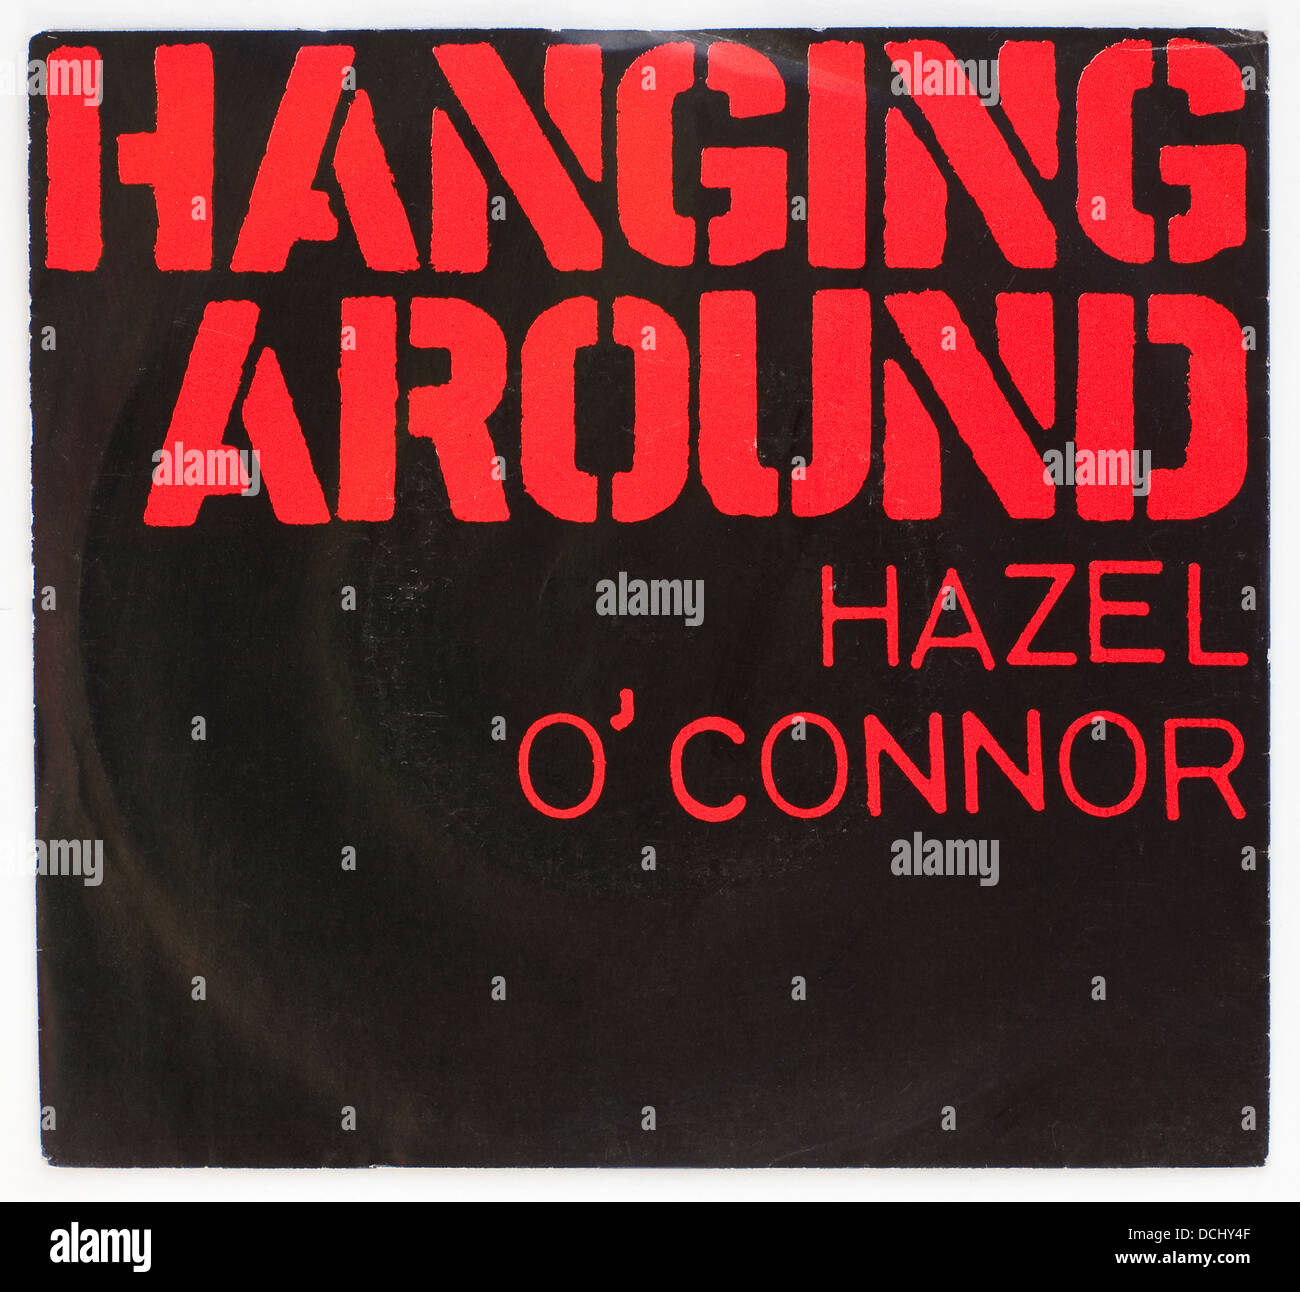 Hazel O'Connor - Hanging Around, 1981 picture cover single on Albion Records - Editorial use only Stock Photo